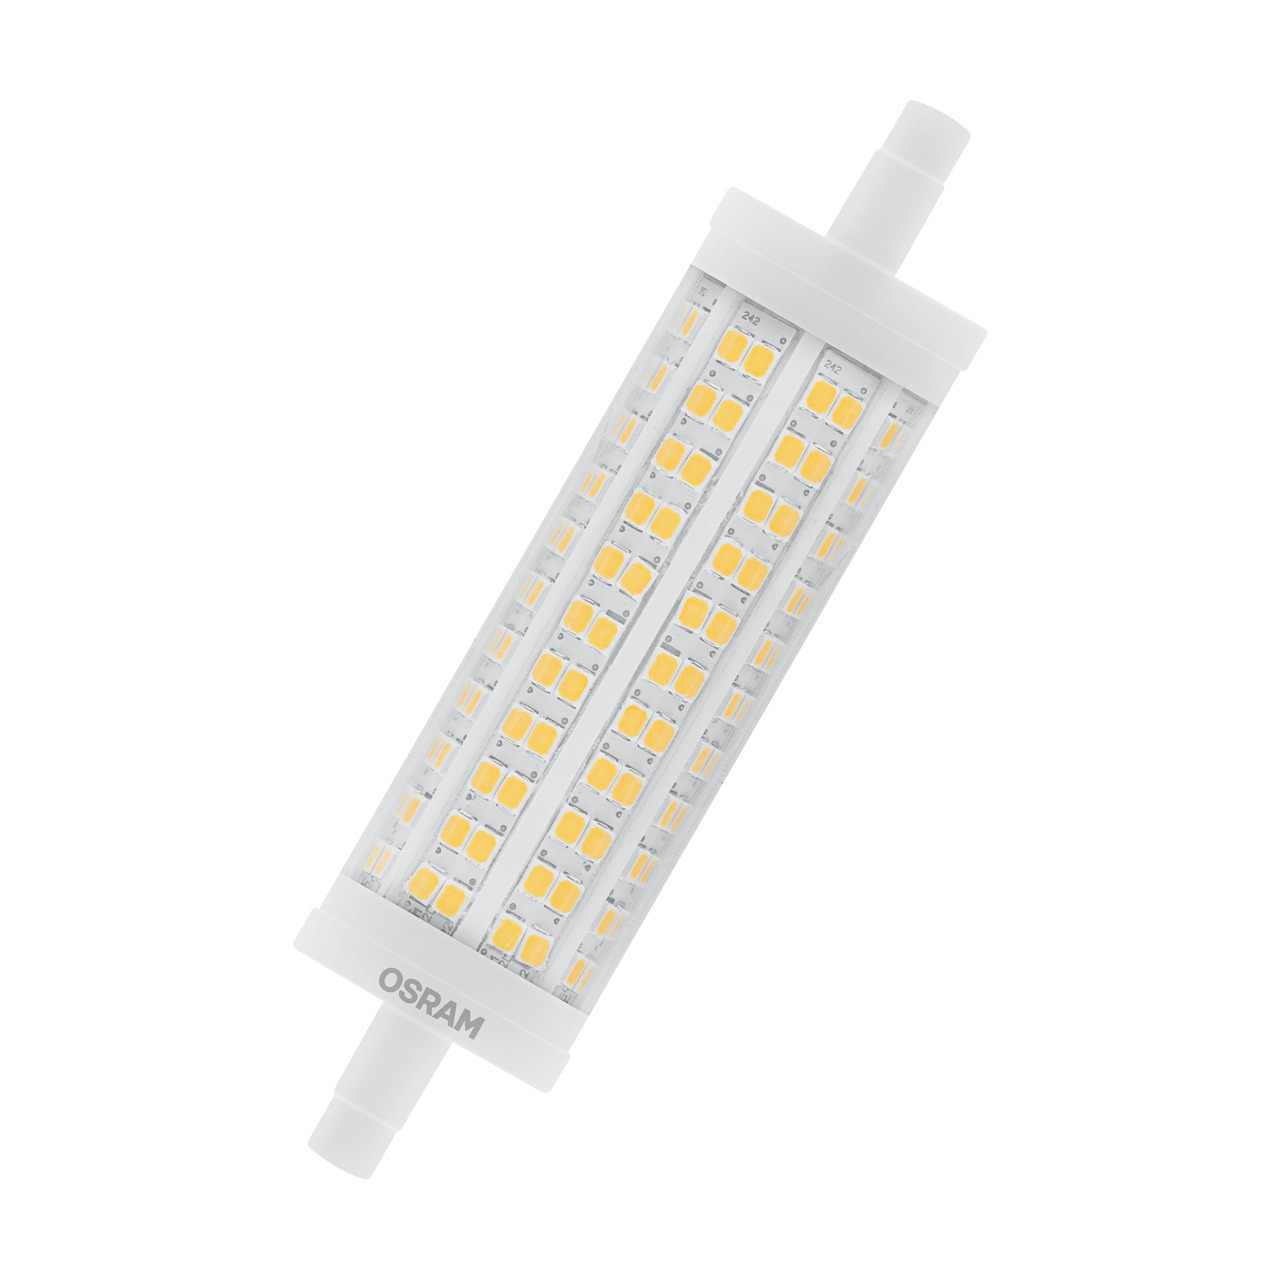 OSRAM 19-W-LED-Lampe T28- R7s- 2452 lm- warmweiss- dimmbar unter Beleuchtung